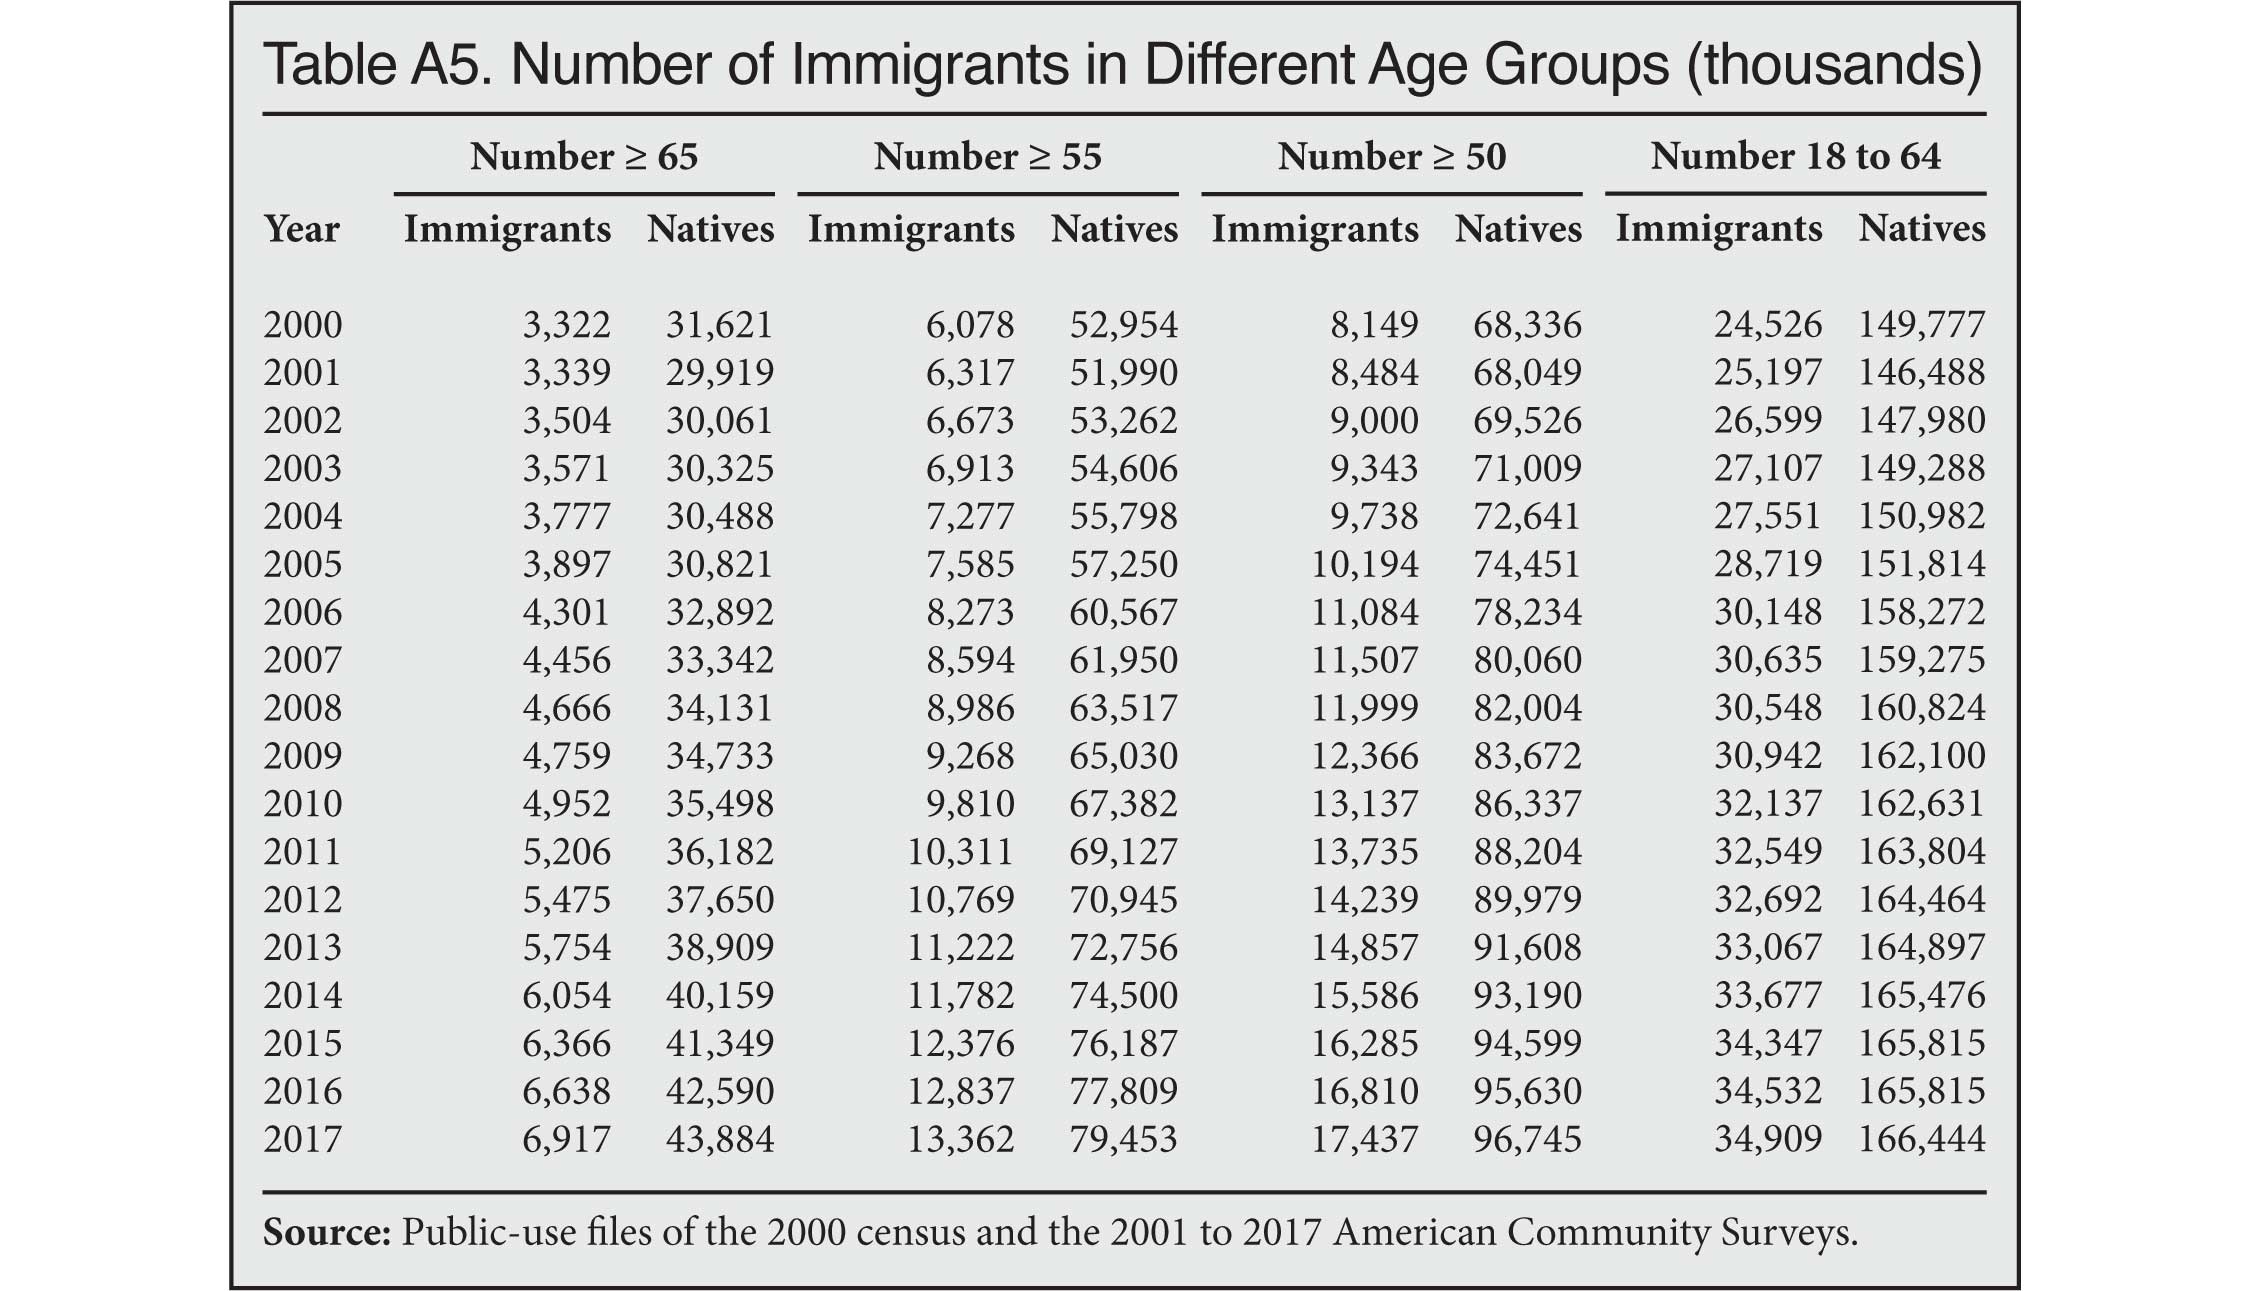 Table: Number of Immigrants in Different Age Groups